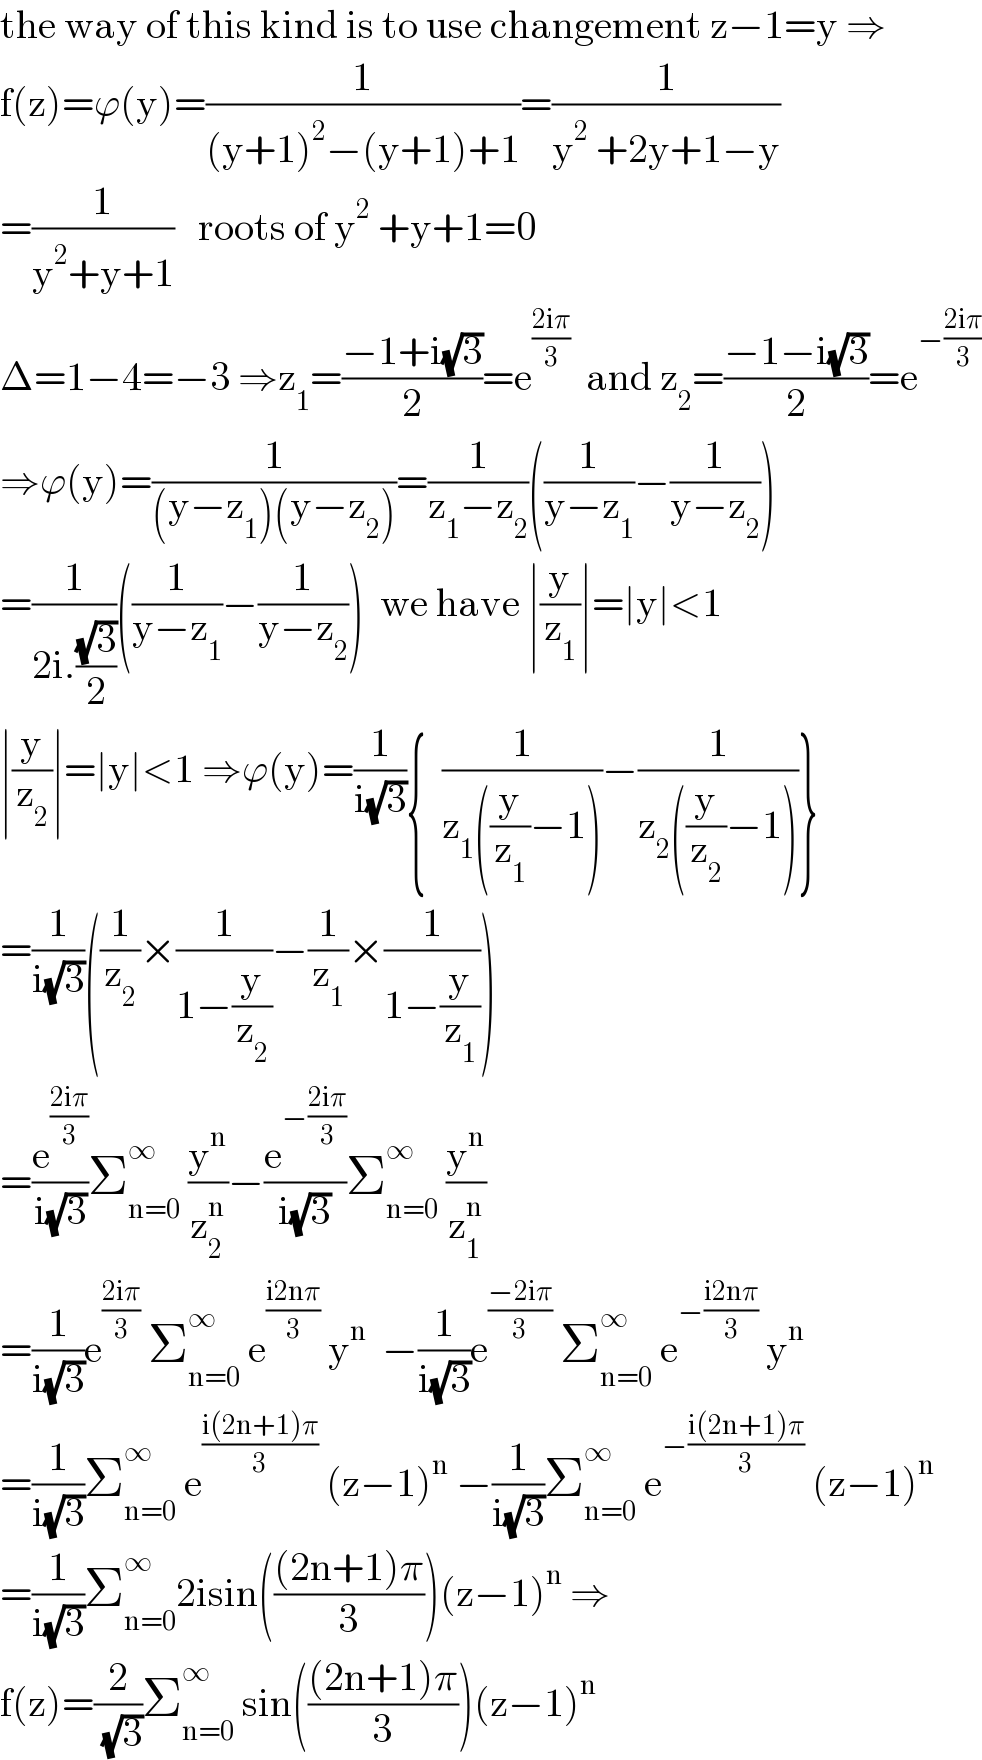 the way of this kind is to use changement z−1=y ⇒  f(z)=ϕ(y)=(1/((y+1)^2 −(y+1)+1))=(1/(y^2  +2y+1−y))  =(1/(y^2 +y+1))   roots of y^2  +y+1=0  Δ=1−4=−3 ⇒z_1 =((−1+i(√3))/2)=e^((2iπ)/3)   and z_2 =((−1−i(√3))/2)=e^(−((2iπ)/3))   ⇒ϕ(y)=(1/((y−z_1 )(y−z_2 )))=(1/(z_1 −z_2 ))((1/(y−z_1 ))−(1/(y−z_2 )))  =(1/(2i.((√3)/2)))((1/(y−z_1 ))−(1/(y−z_2 )))  we have ∣(y/z_1 )∣=∣y∣<1  ∣(y/z_2 )∣=∣y∣<1 ⇒ϕ(y)=(1/(i(√3))){  (1/(z_1 ((y/z_1 )−1)))−(1/(z_2 ((y/z_2 )−1)))}  =(1/(i(√3)))((1/z_2 )×(1/(1−(y/z_2 )))−(1/z_1 )×(1/(1−(y/z_1 ))))  =(e^((2iπ)/3) /(i(√3)))Σ_(n=0) ^∞  (y^n /z_2 ^n )−(e^(−((2iπ)/3)) /(i(√3)))Σ_(n=0) ^∞  (y^n /z_1 ^n )  =(1/(i(√3)))e^((2iπ)/3)  Σ_(n=0) ^∞  e^((i2nπ)/3)  y^n   −(1/(i(√3)))e^((−2iπ)/3)  Σ_(n=0) ^∞  e^(−((i2nπ)/3))  y^n   =(1/(i(√3)))Σ_(n=0) ^∞  e^((i(2n+1)π)/3)  (z−1)^n  −(1/(i(√3)))Σ_(n=0) ^∞  e^(−((i(2n+1)π)/3))  (z−1)^n   =(1/(i(√3)))Σ_(n=0) ^∞ 2isin((((2n+1)π)/3))(z−1)^n  ⇒  f(z)=(2/( (√3)))Σ_(n=0) ^∞  sin((((2n+1)π)/3))(z−1)^n   